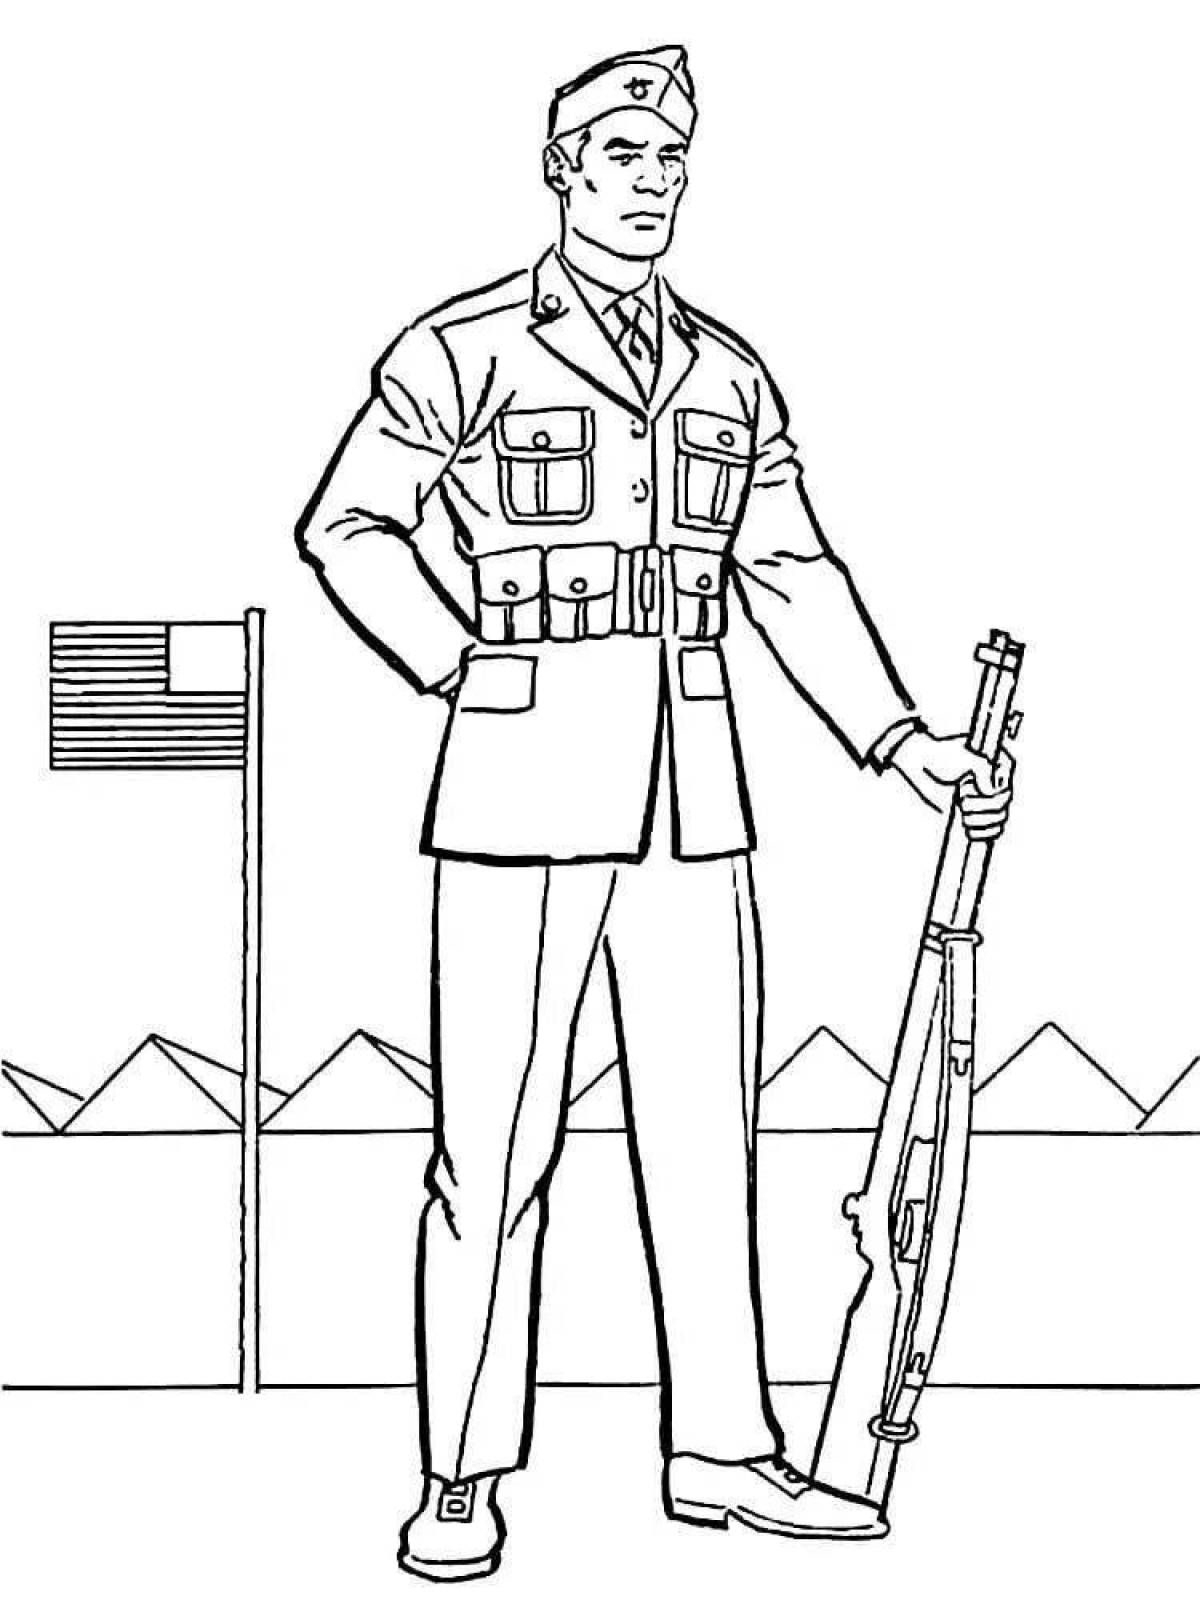 Soldier drawing #7